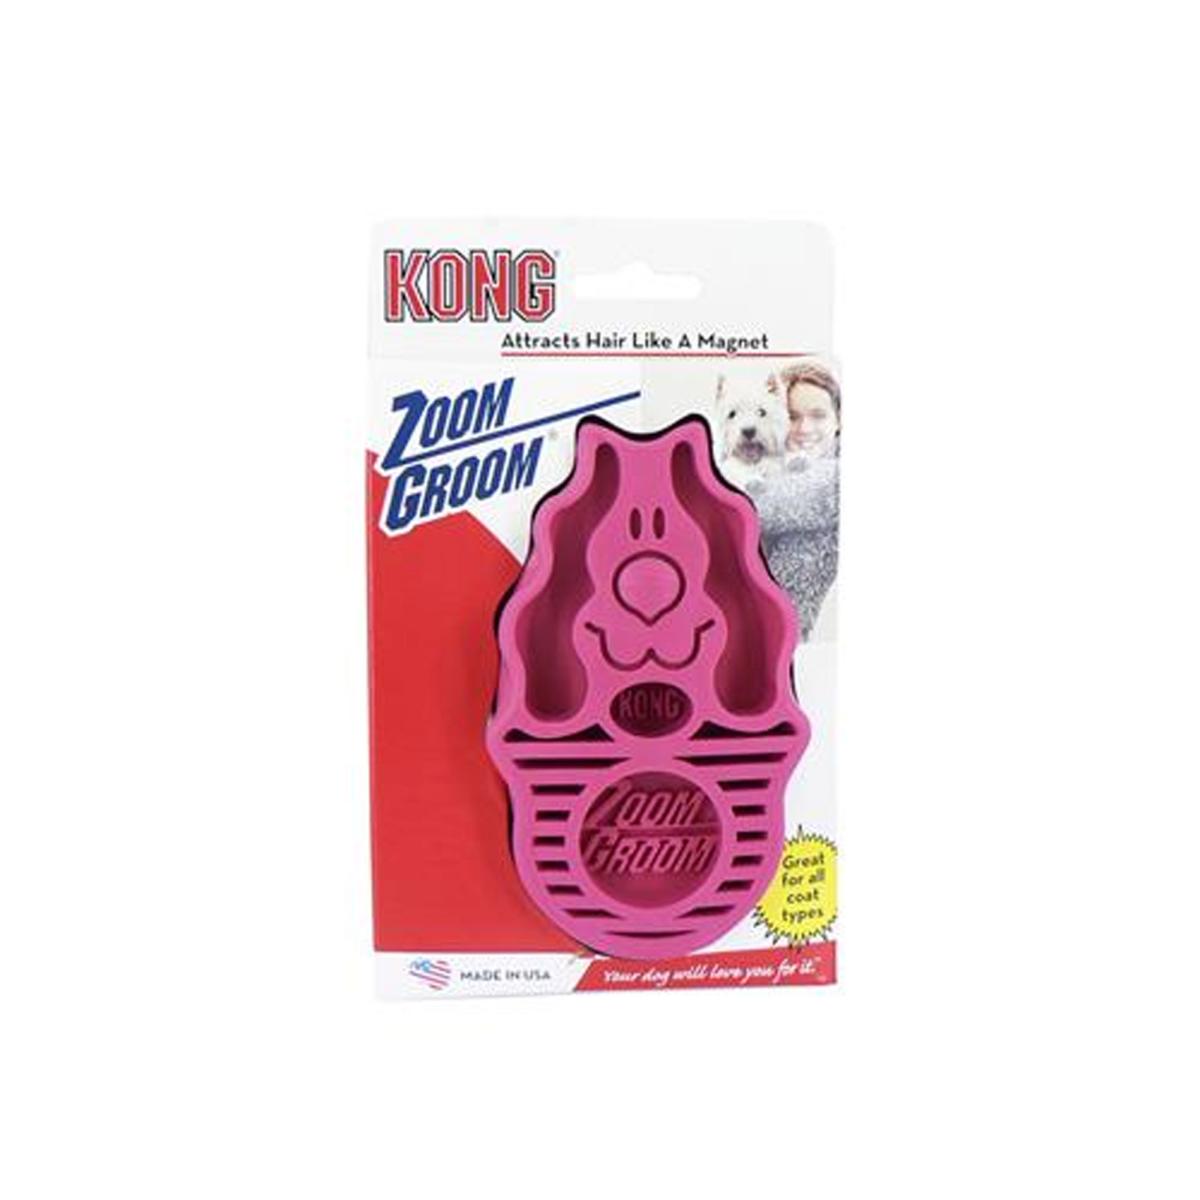 KONG Zoom Groom For Dogs Firm